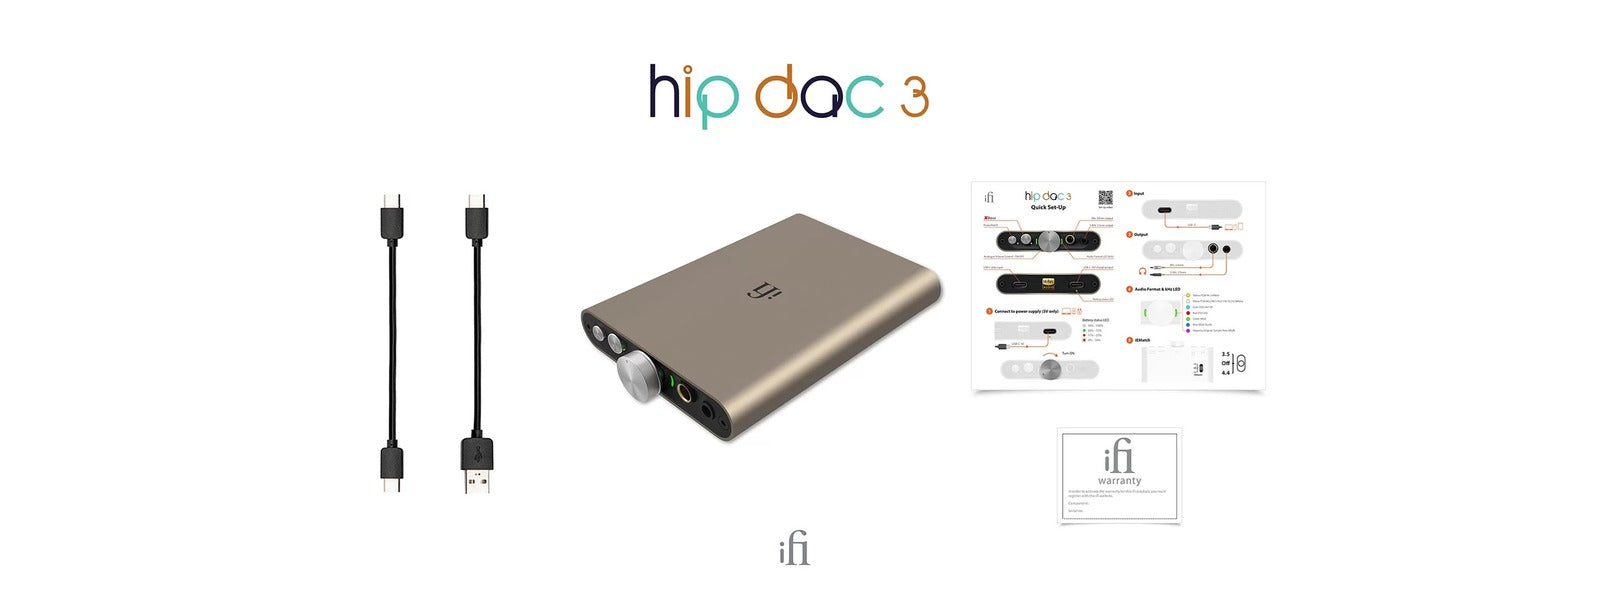 ifi audio hip dac 3 accessories and warranty card